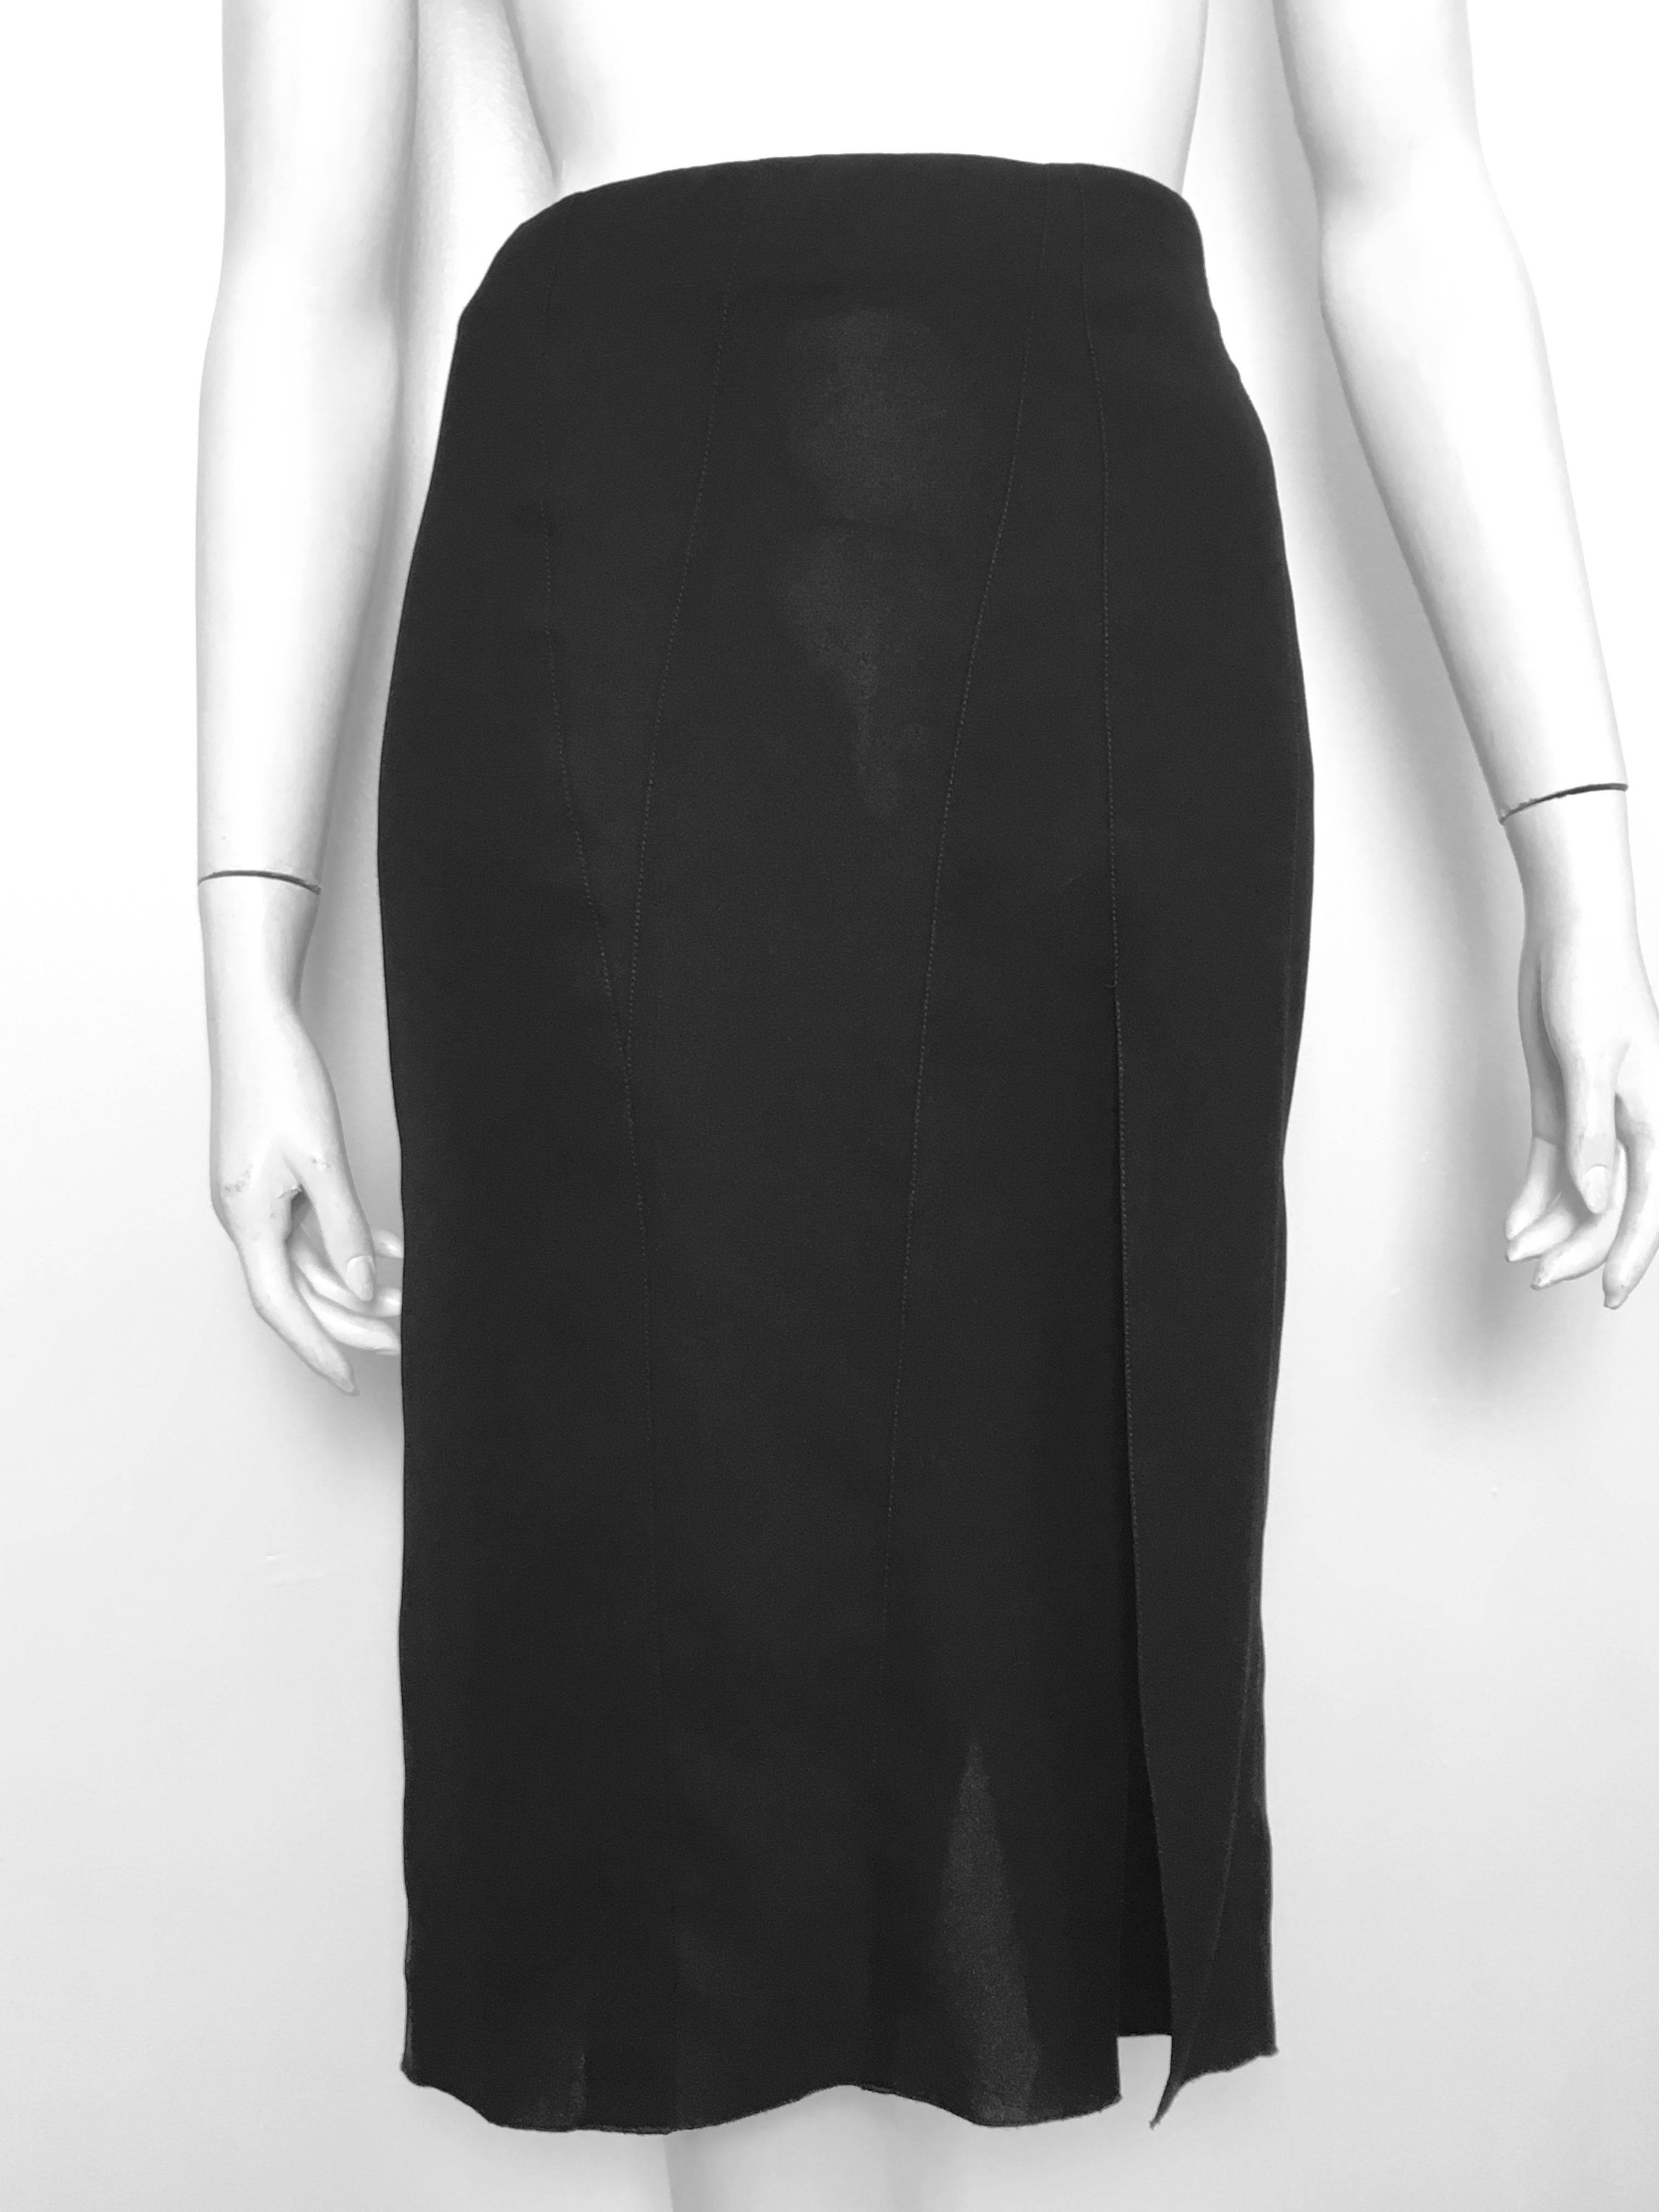 Donna Karan 1990s Black Sheer Skirt Size 8, made in Italy. For Sale 8